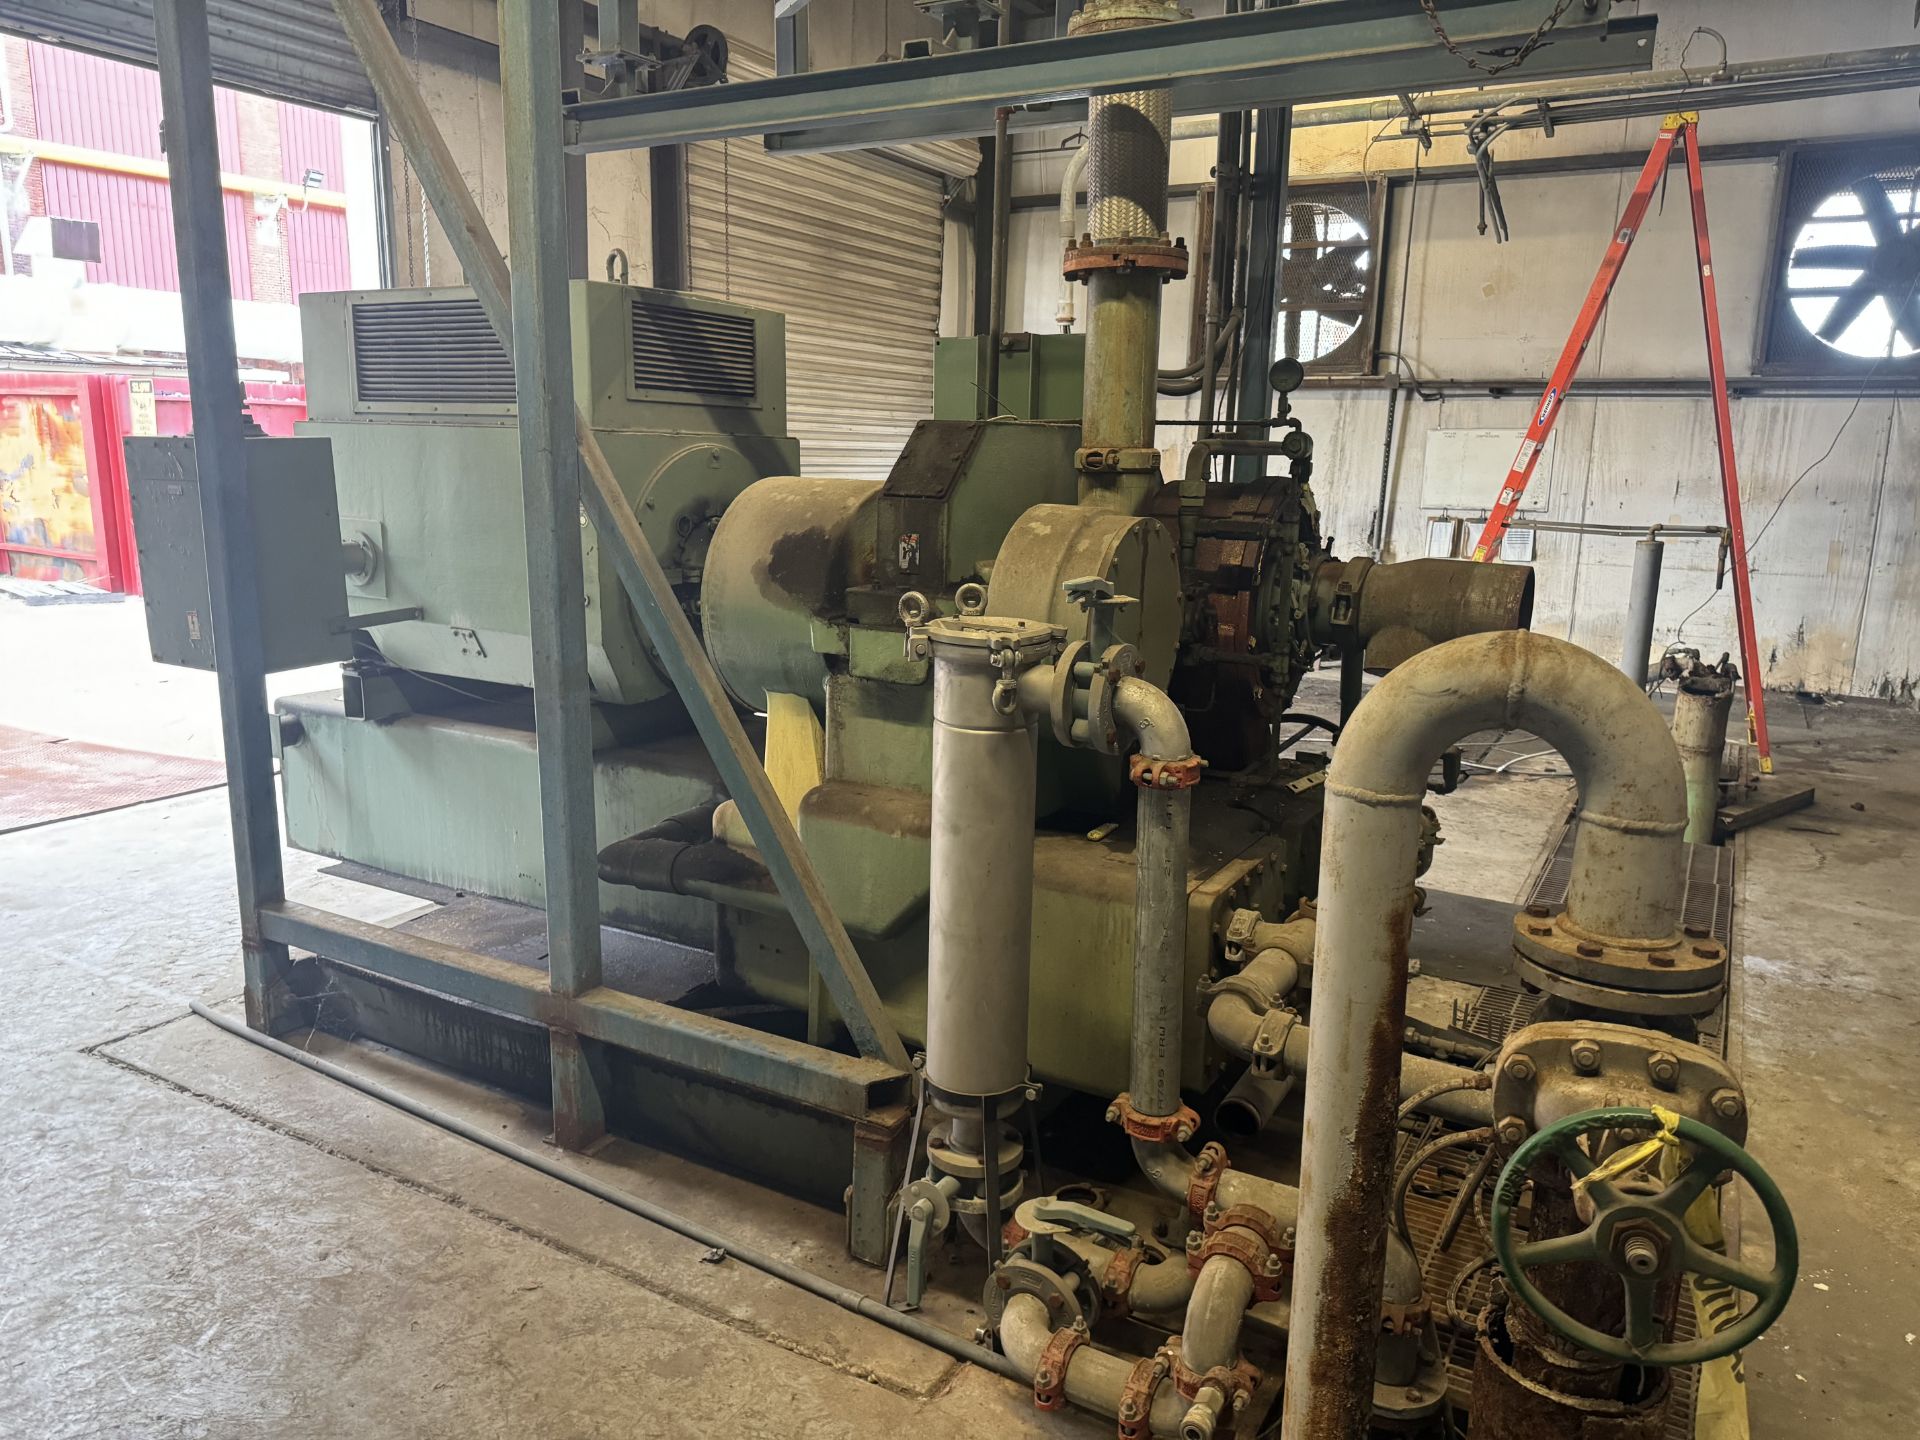 Cooper Turboair 48 Air Compressor, Serial# F09143, 1190 HP, Rigging/ Removal Fee - $3800 - Image 3 of 6